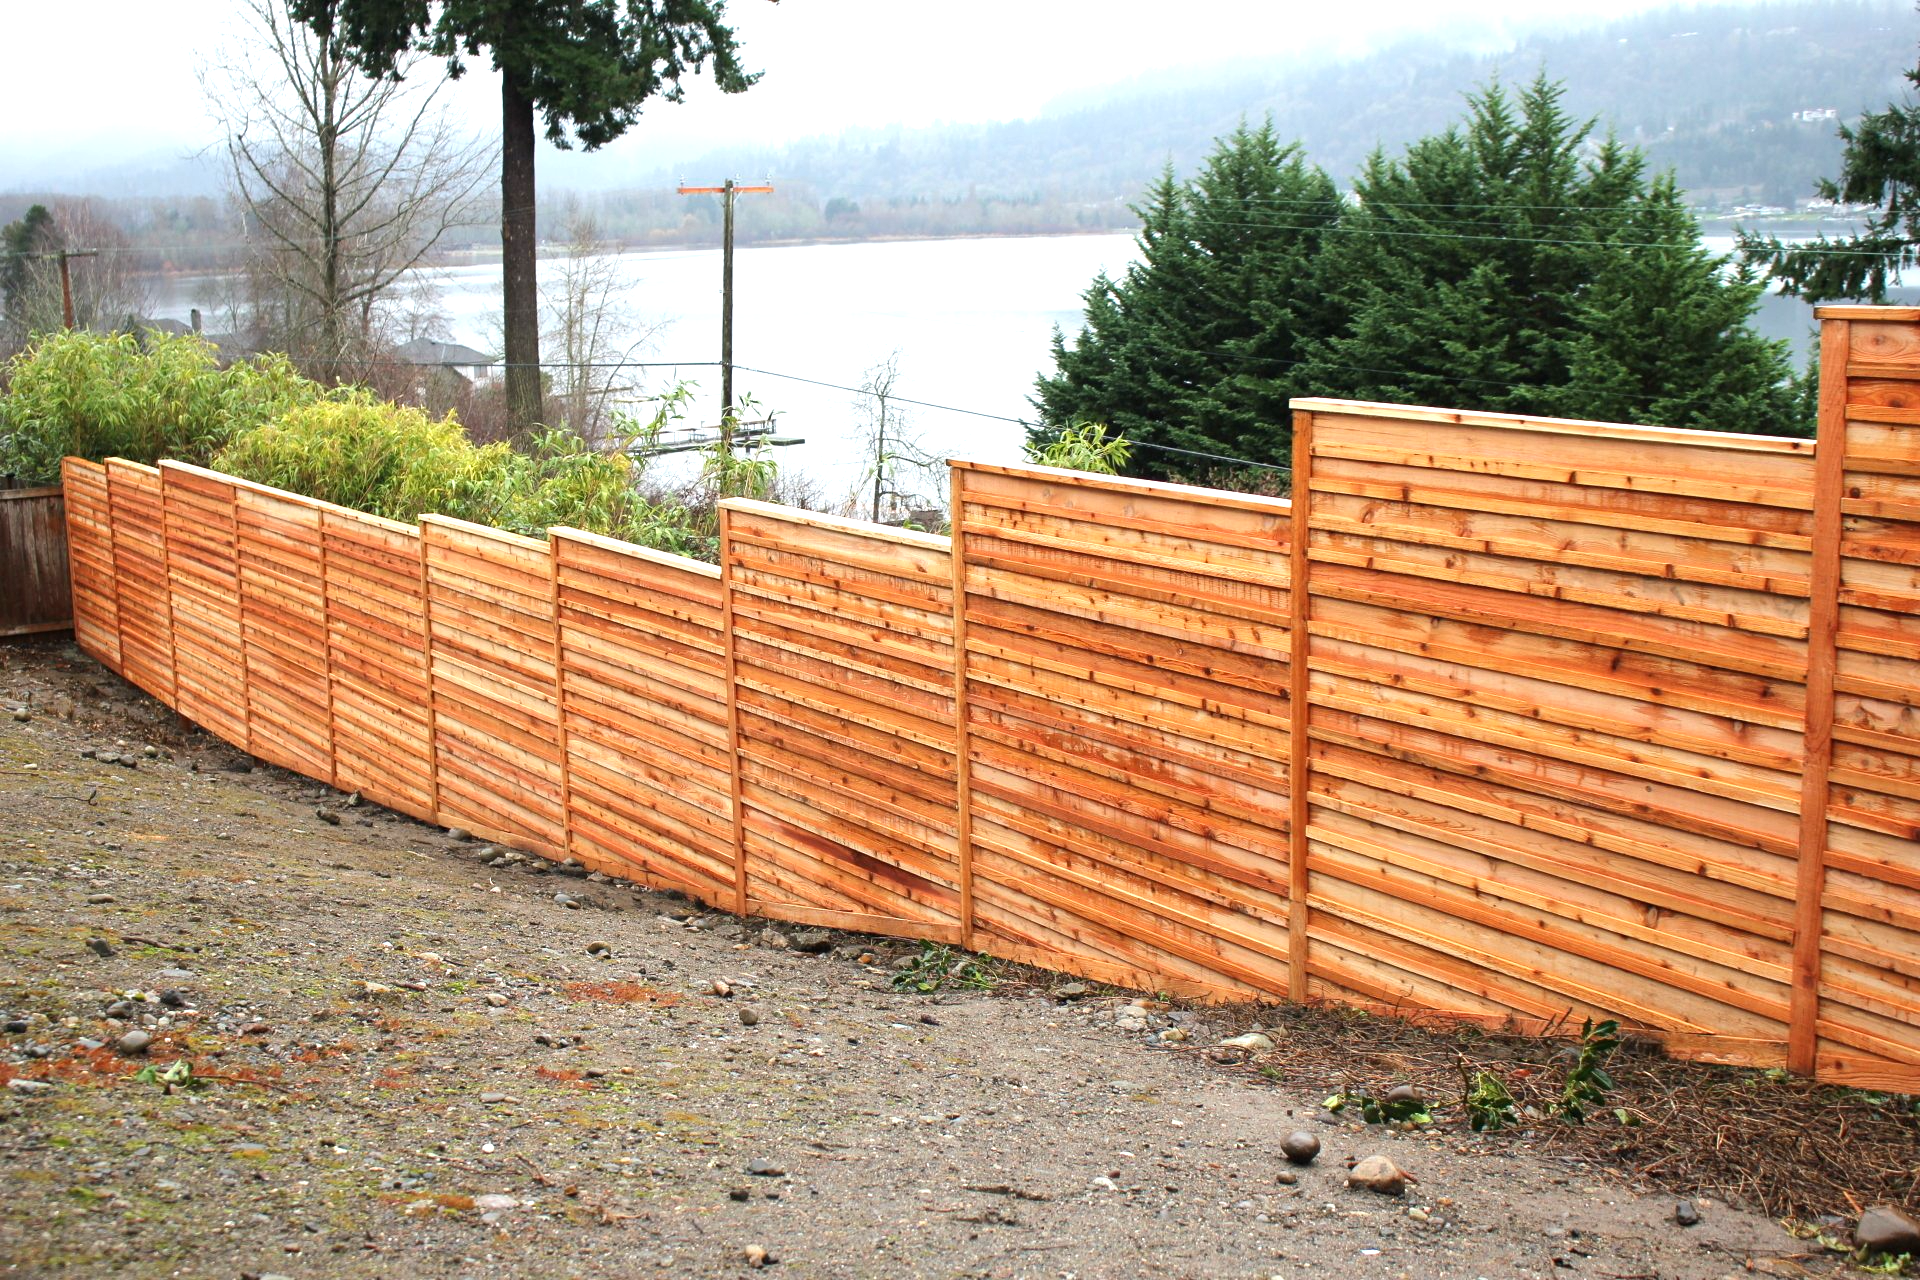 What Is The Least Expensive Fence To Purchase?